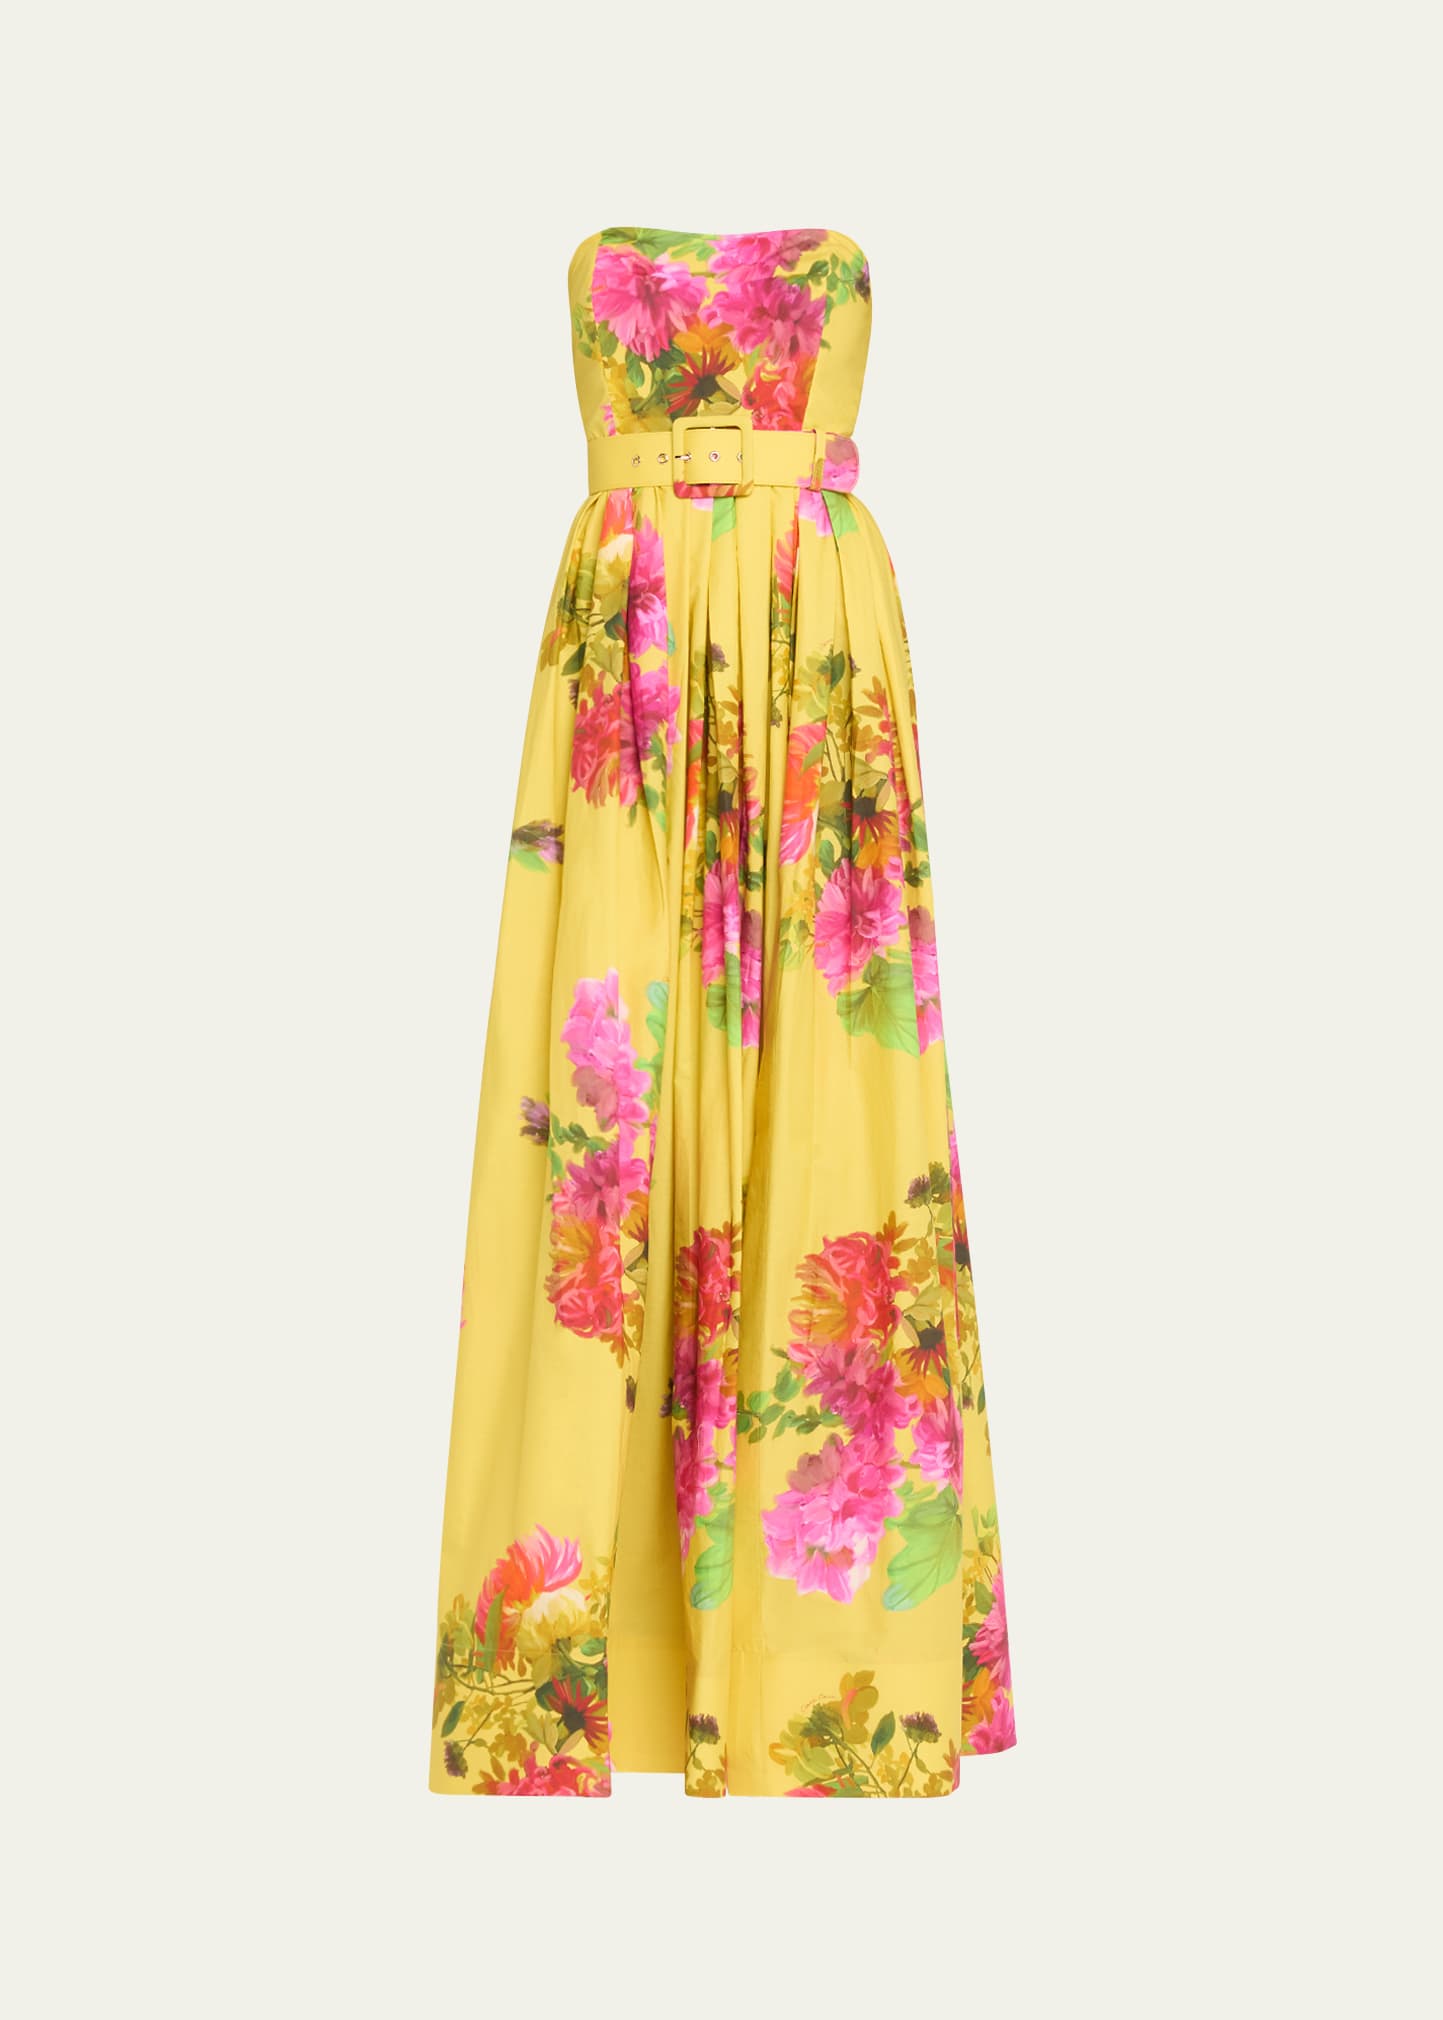 CARA CARA GREENFIELD STRAPLESS BELTED FLORAL POPLIN GOWN